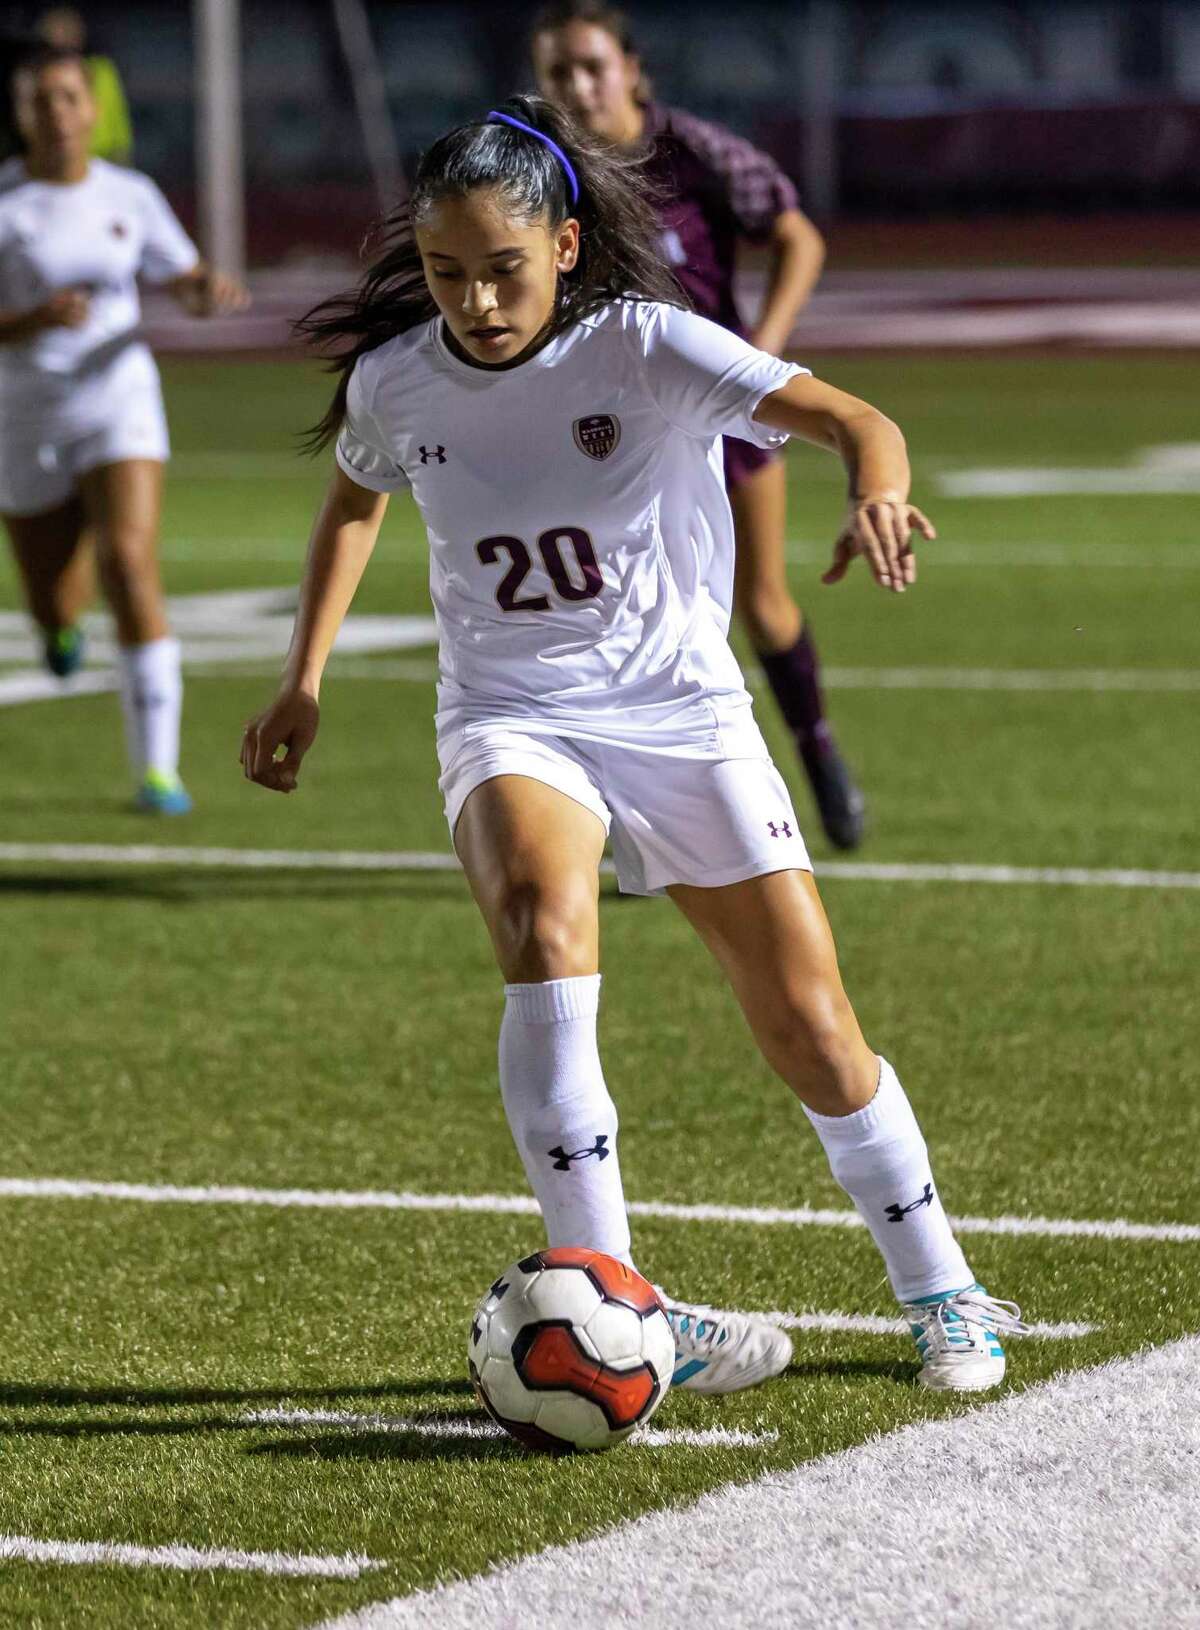 Magnolia West soccer player Karina Sosa (20) drives the ball in a 19-5A match against Magnolia high school in Magnolia, Tuesday, Feb. 4 , 2020.